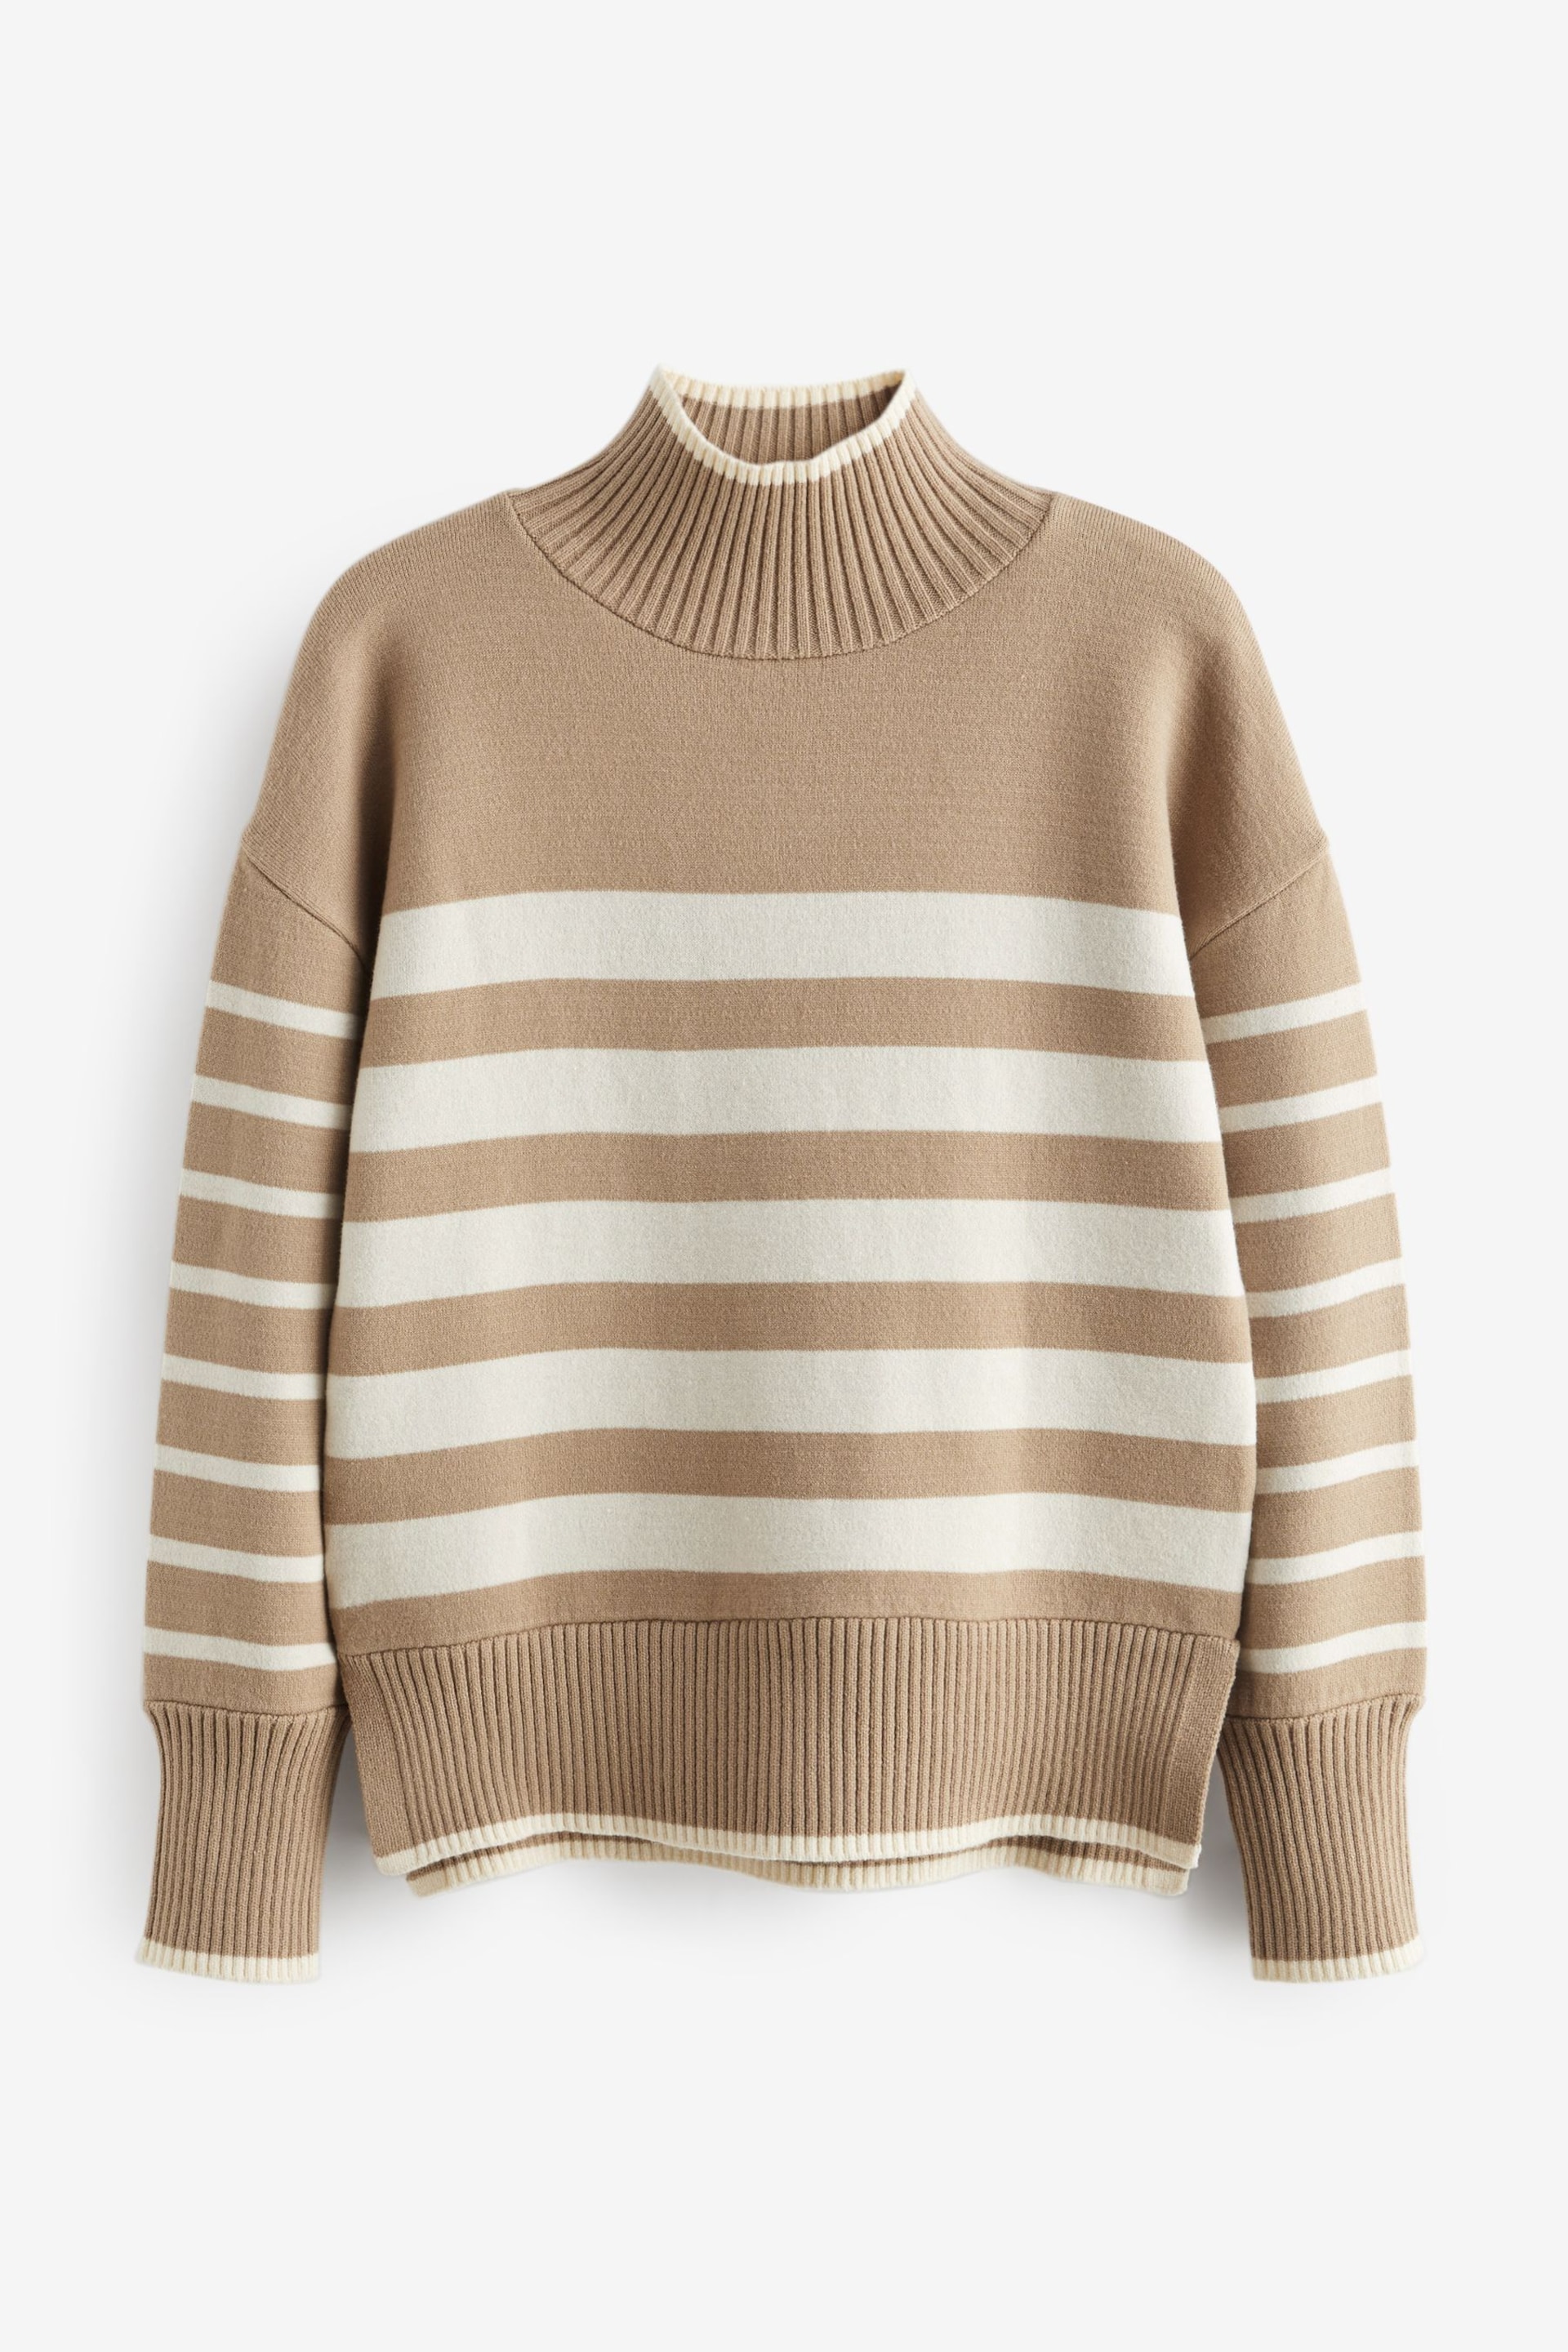 Neutral/Ecru Cream High Neck Stripe Cosy Knitted Jumper Long Sleeve Top - Image 5 of 6